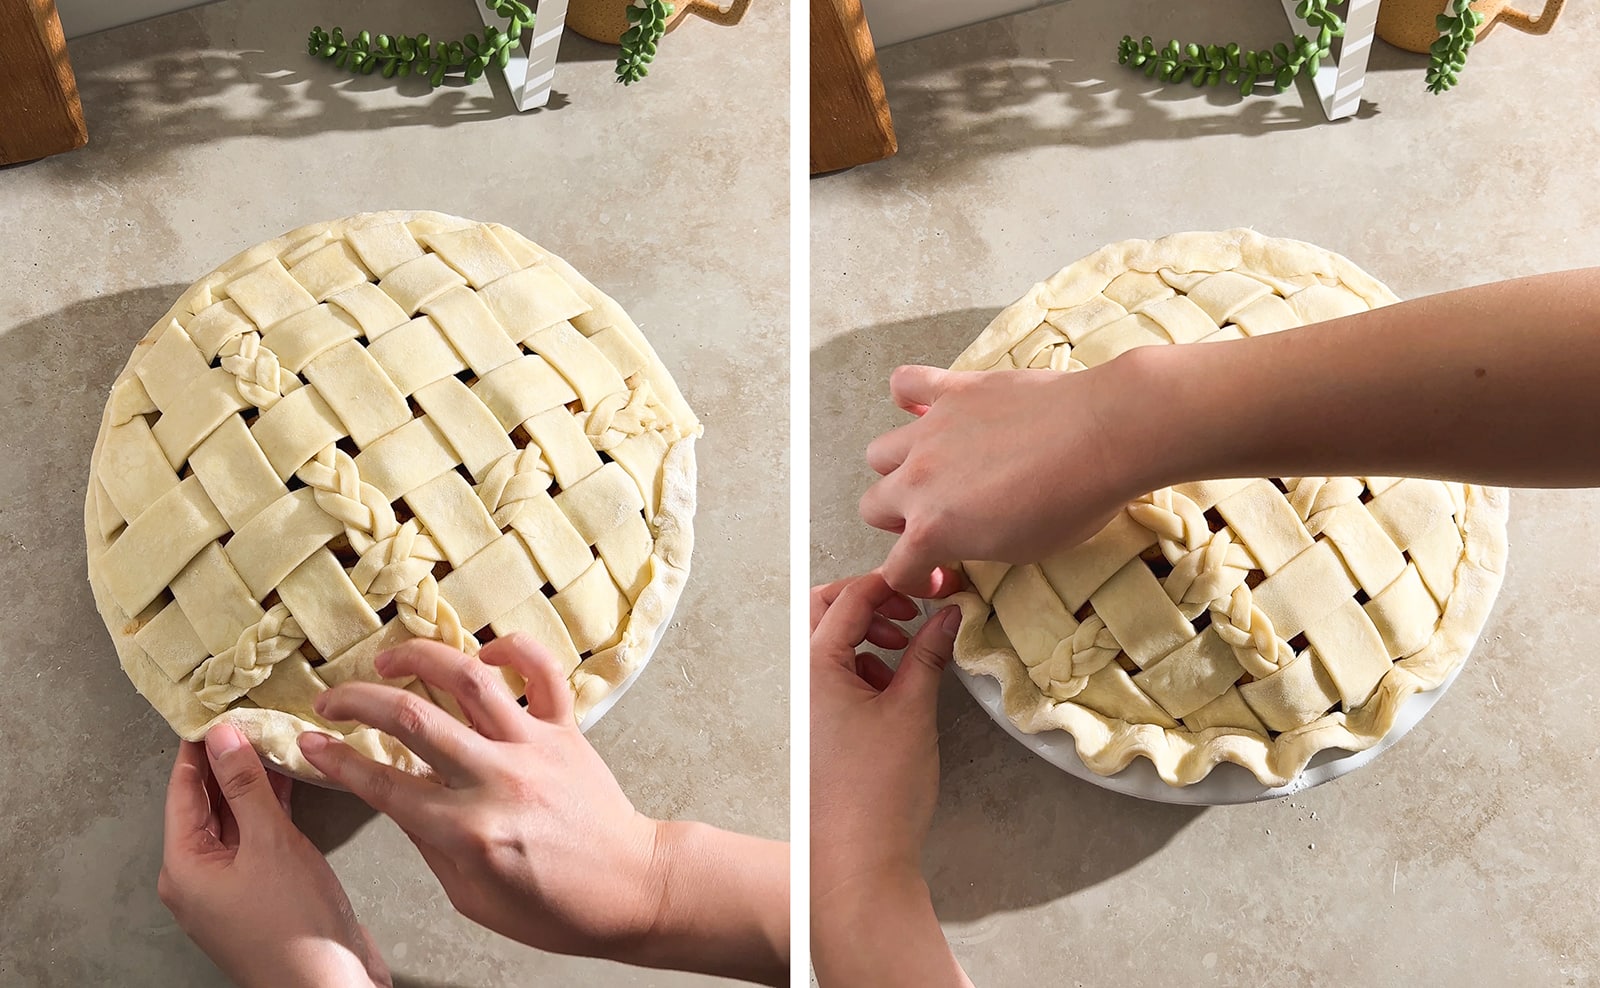 Left to right: hands folding pie crust over, hands crimping pie crust.